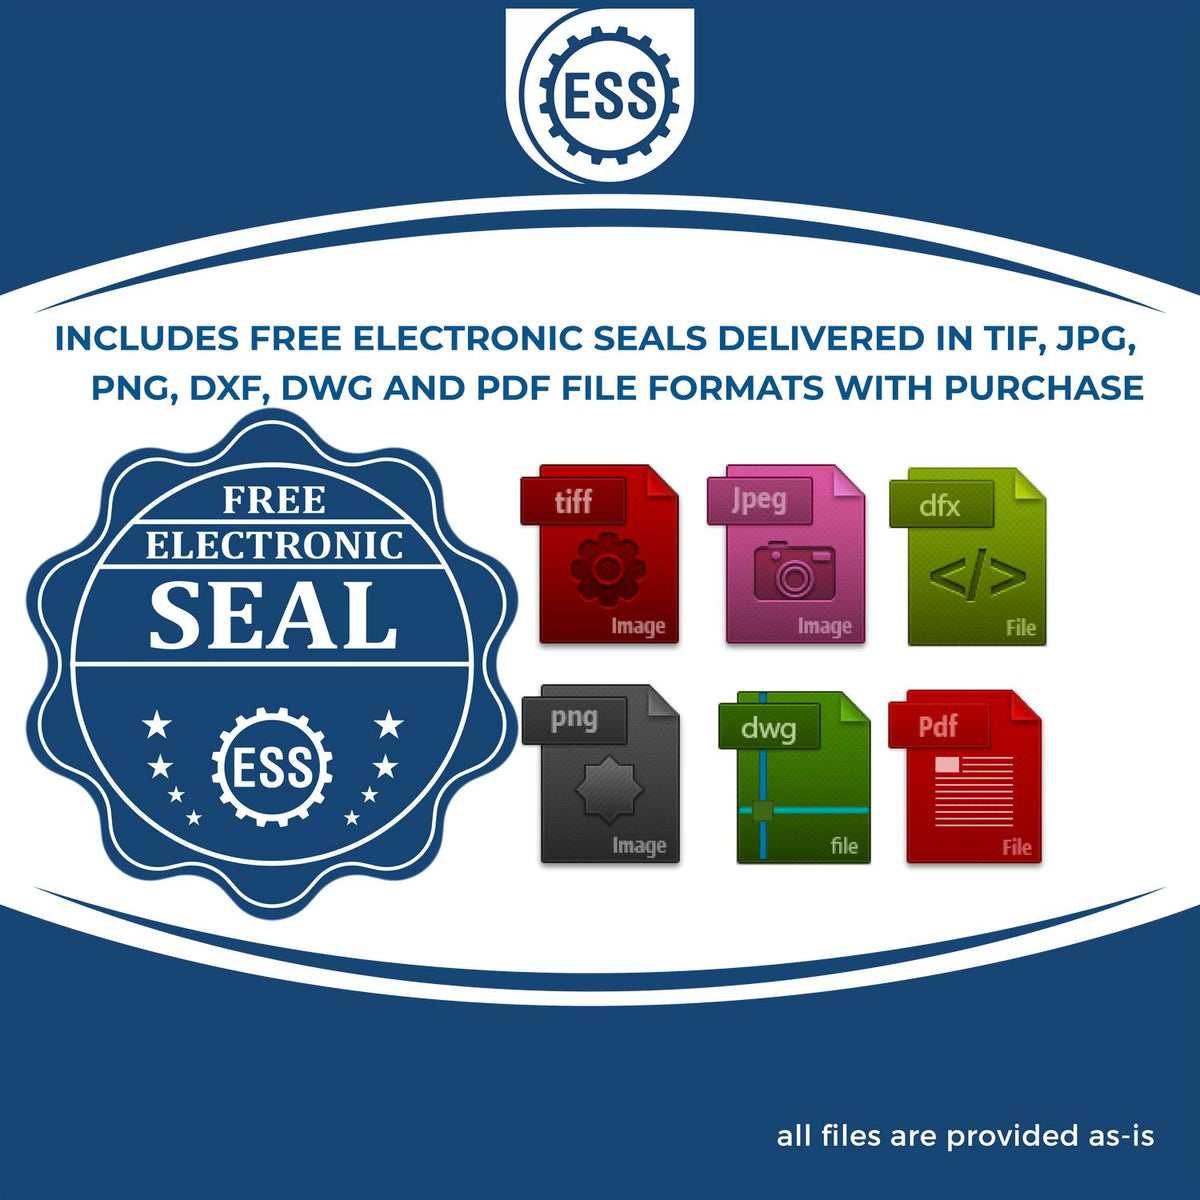 An infographic for the free electronic seal for the Slim Pre-Inked Mississippi Architect Seal Stamp illustrating the different file type icons such as DXF, DWG, TIF, JPG and PNG.